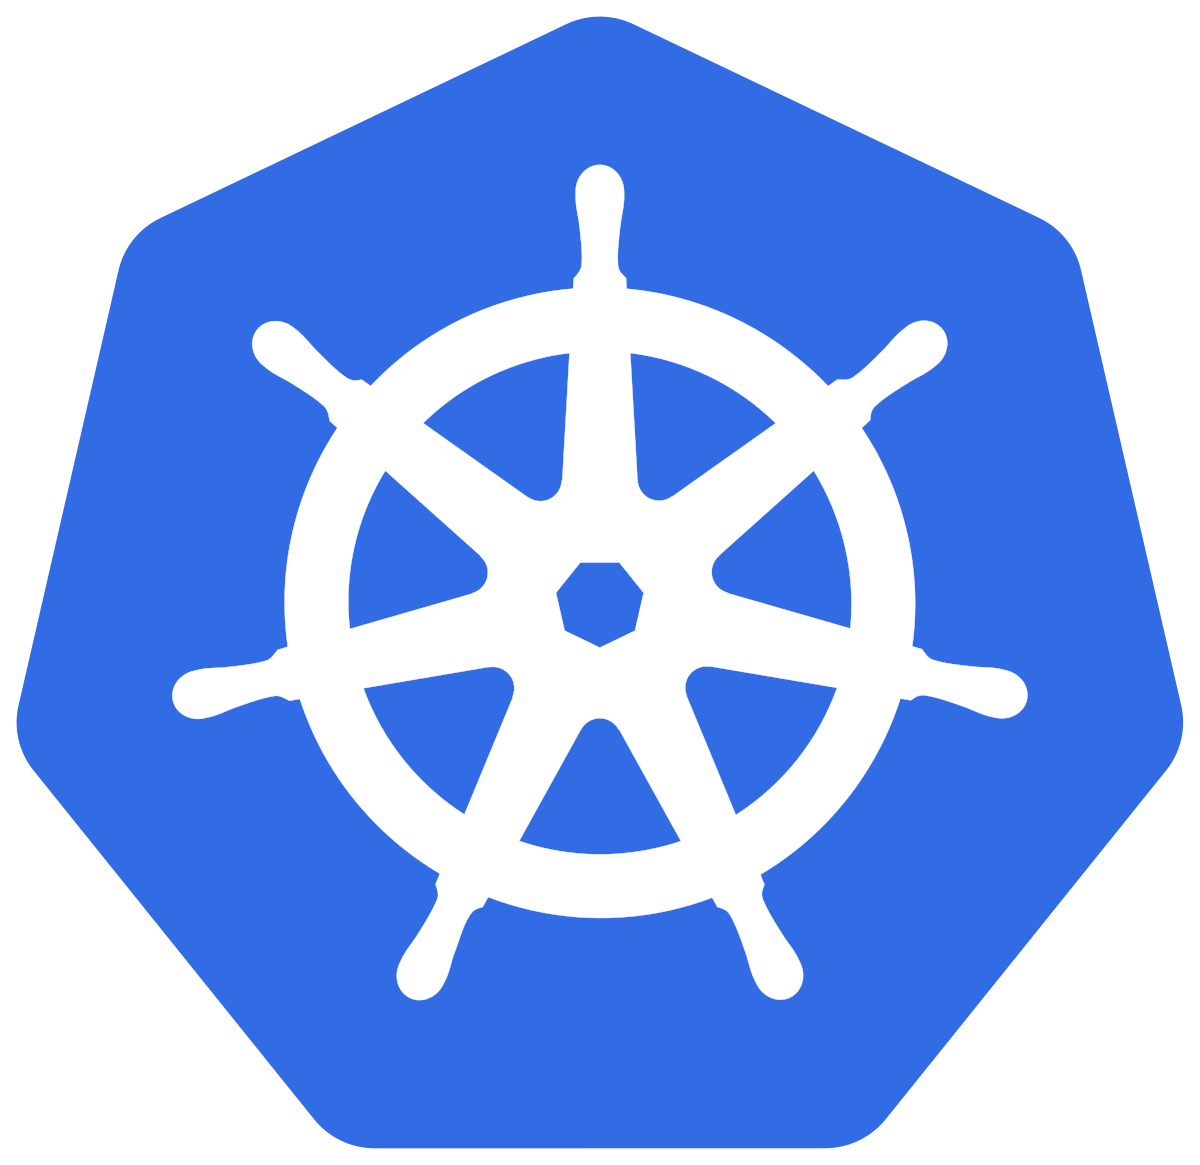 Get Started with Kubernetes